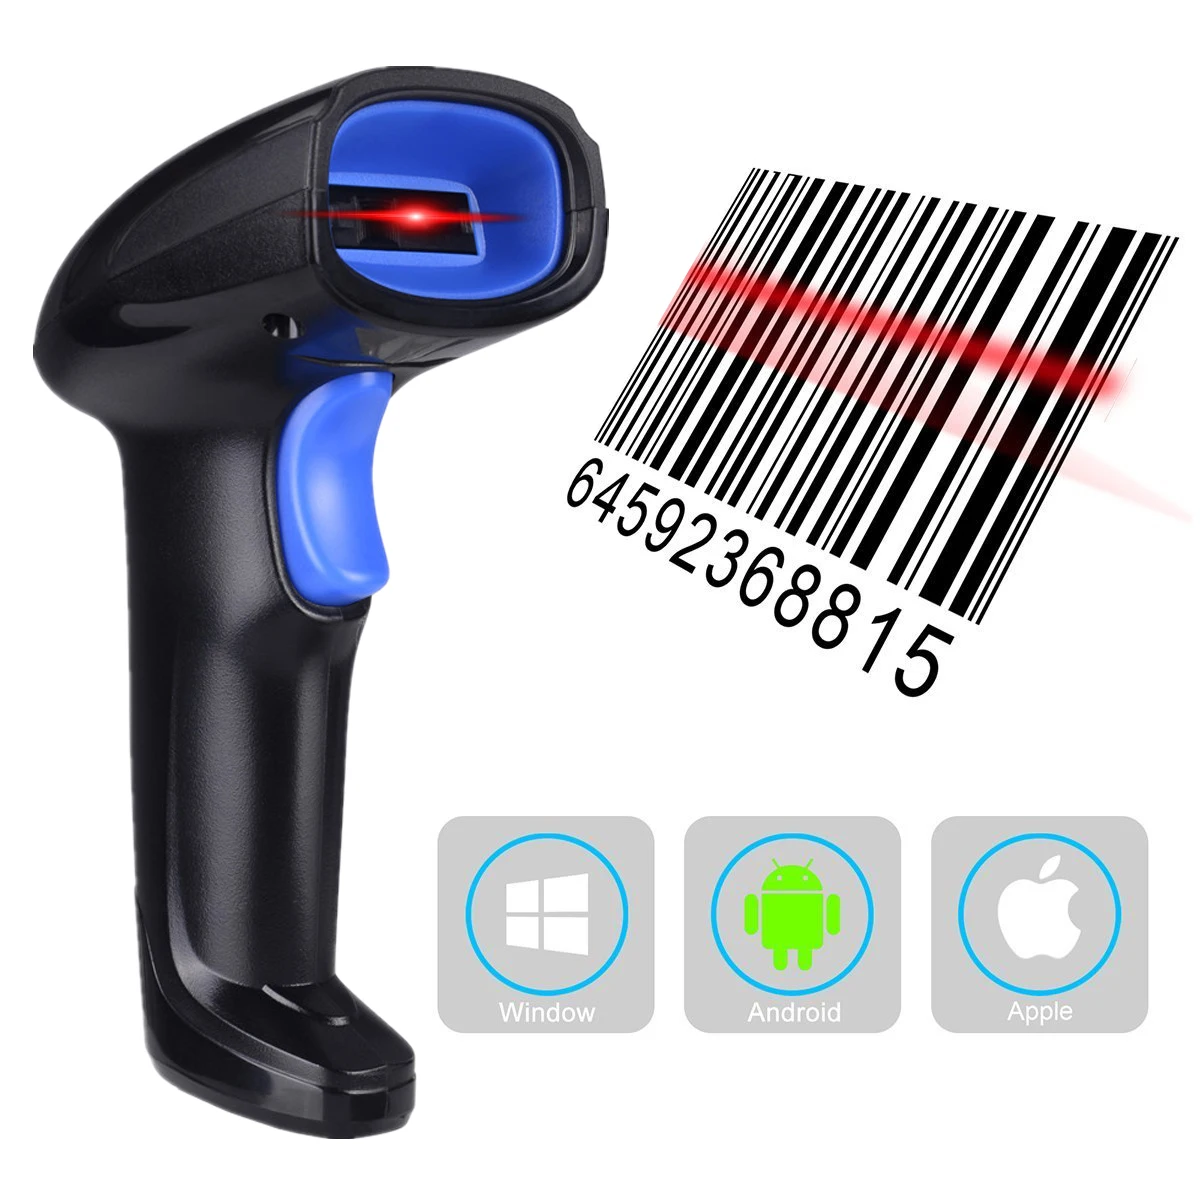 Manual Trigger/Continuous Scanning/Auto-Induction 3 Mode Switchable 1D CCD BT Barcode Scanner